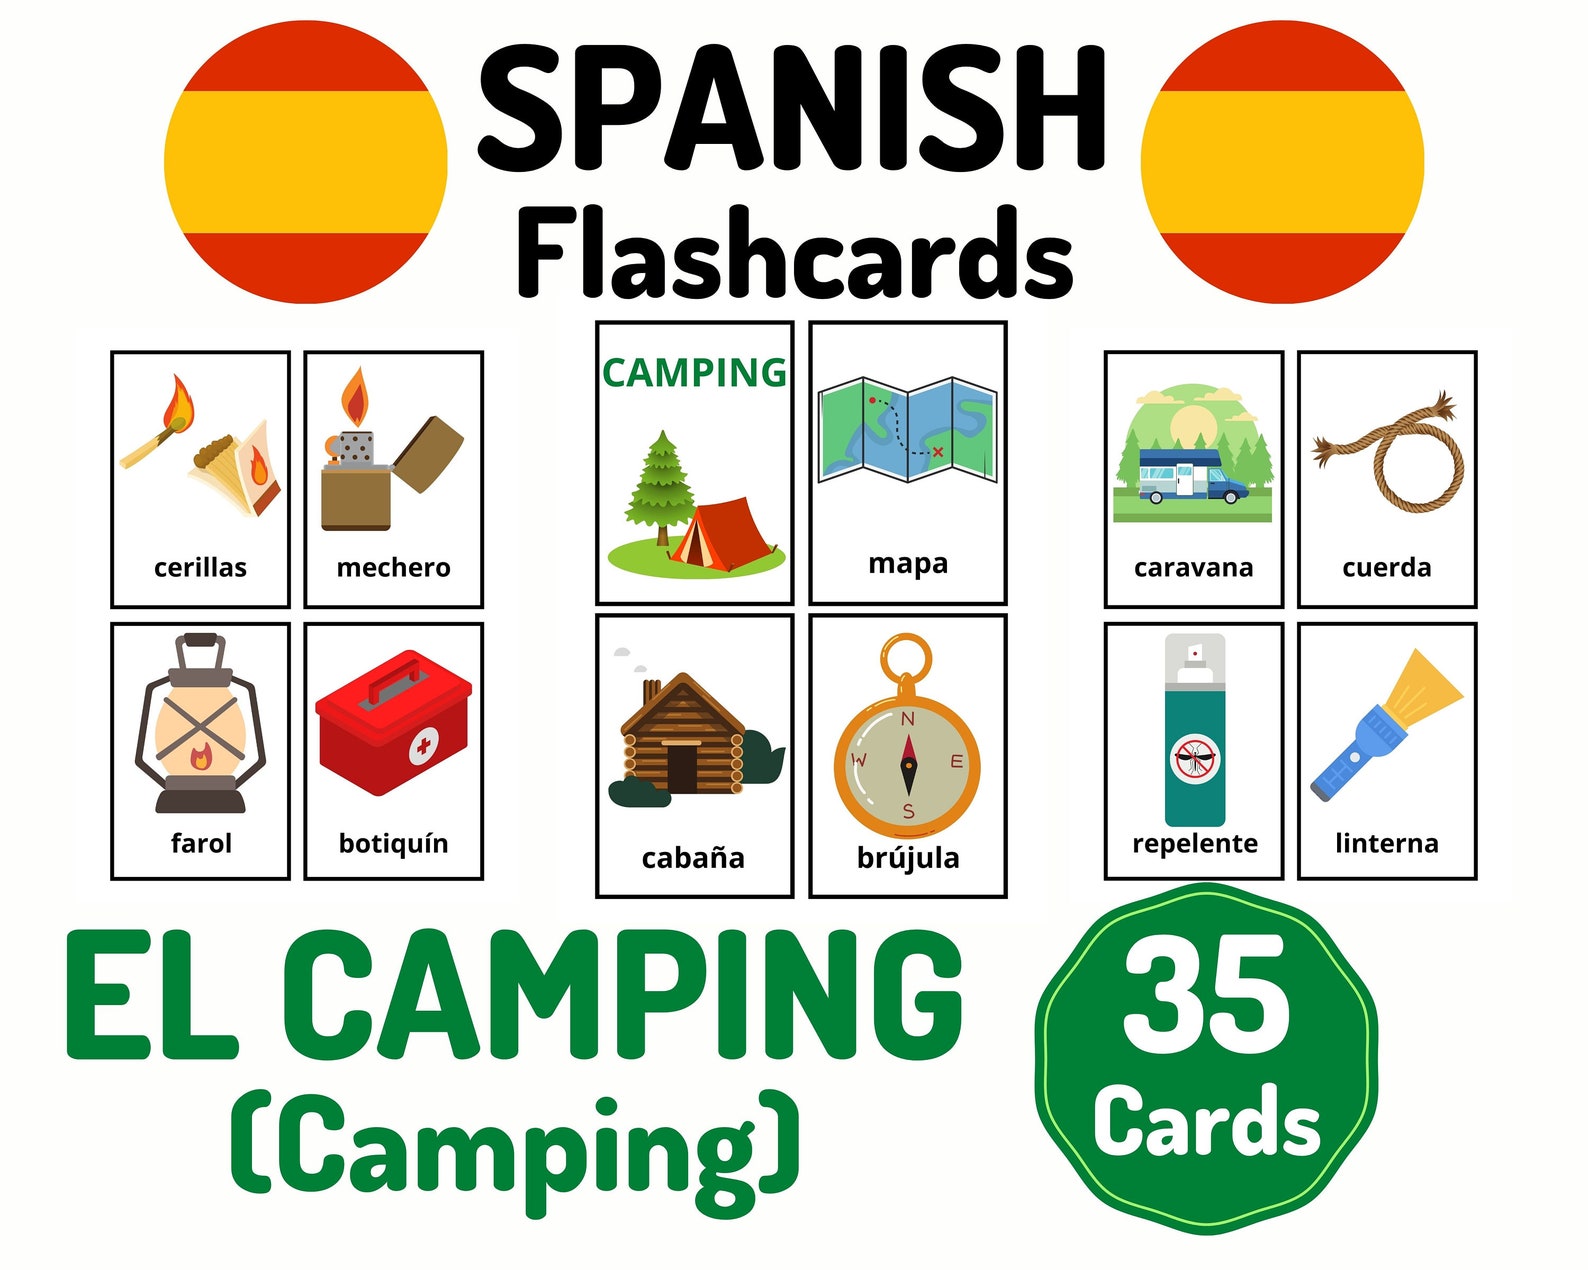 Camp vocabulary. Camping Flashcards for Kids. Camping Vocabulary Flashcards. Camping Vocabulary. Flashcards incredible English 3 Flashcards Camping.